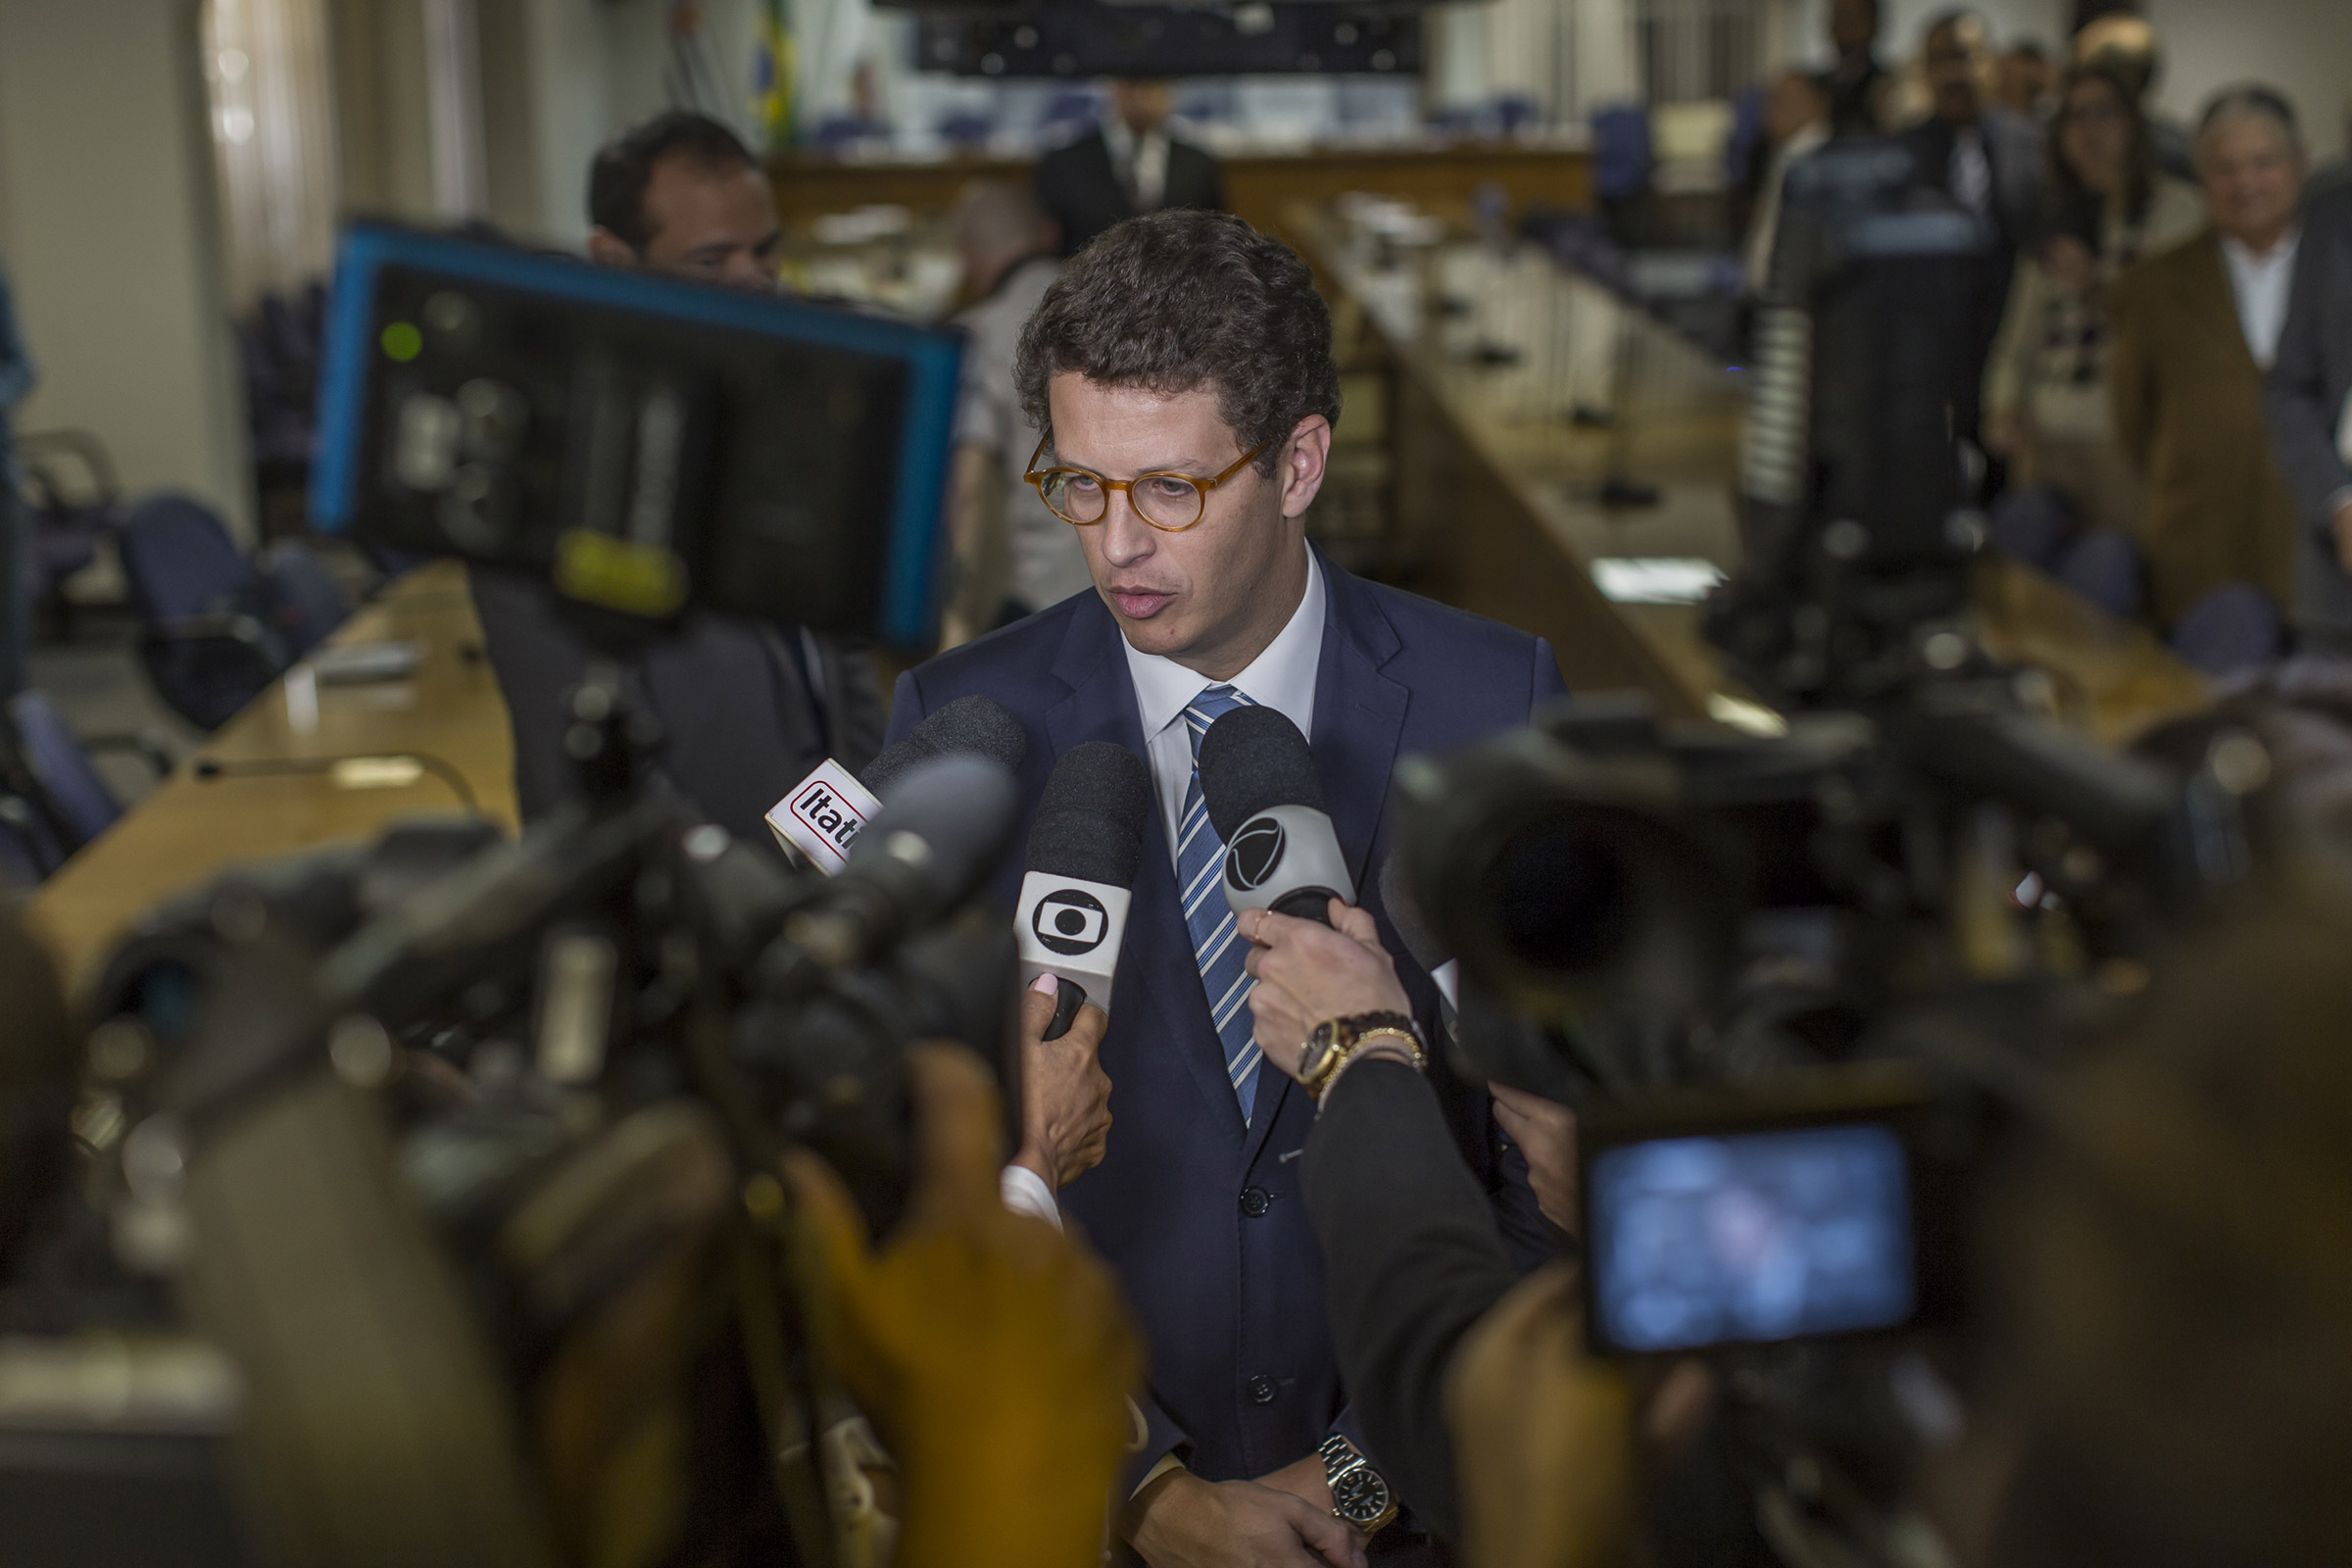 Ricardo Salles, Brazil's environment minister, speaks to journalists in Sao Paulo in August 2019. Activists say Salles is working to appease certain business sectors that form a crucial part of Bolsonaro's support base. (Rodrigo Capote—Bloomberg/Getty Images)